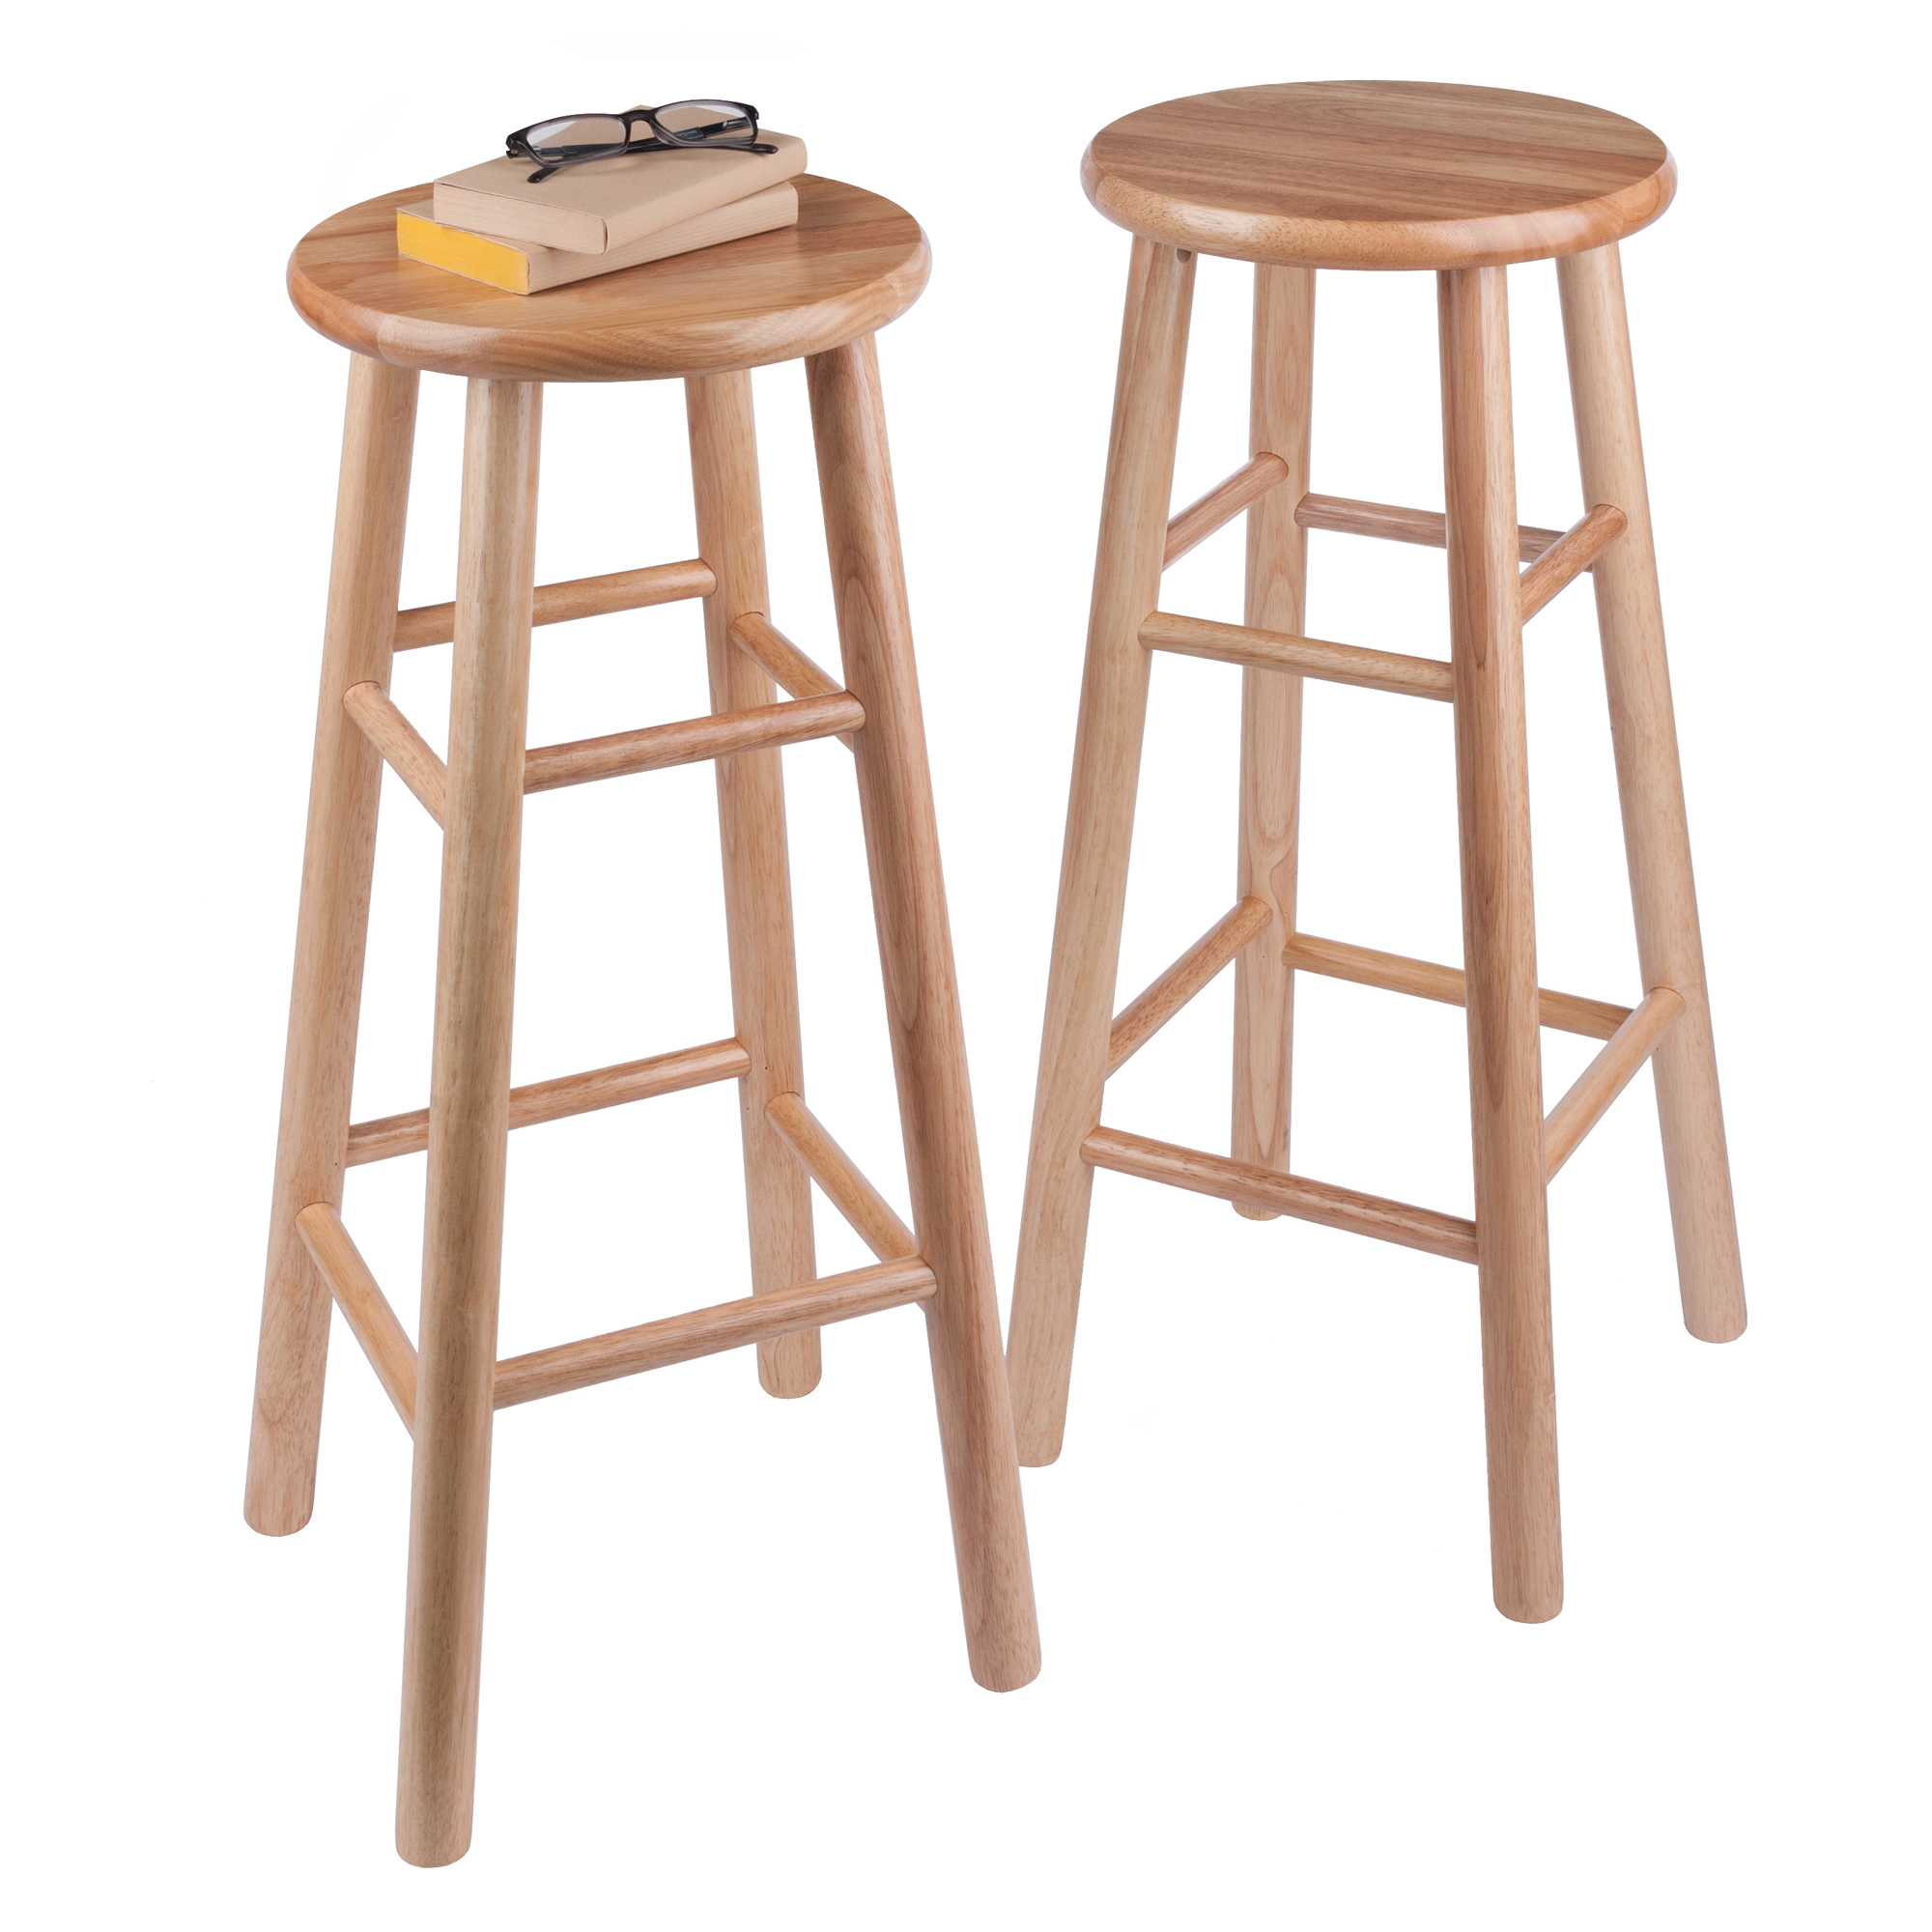 Winsome All Natural 30 in. Beveled Seat Bar Stools - Set of 2 - image 4 of 6